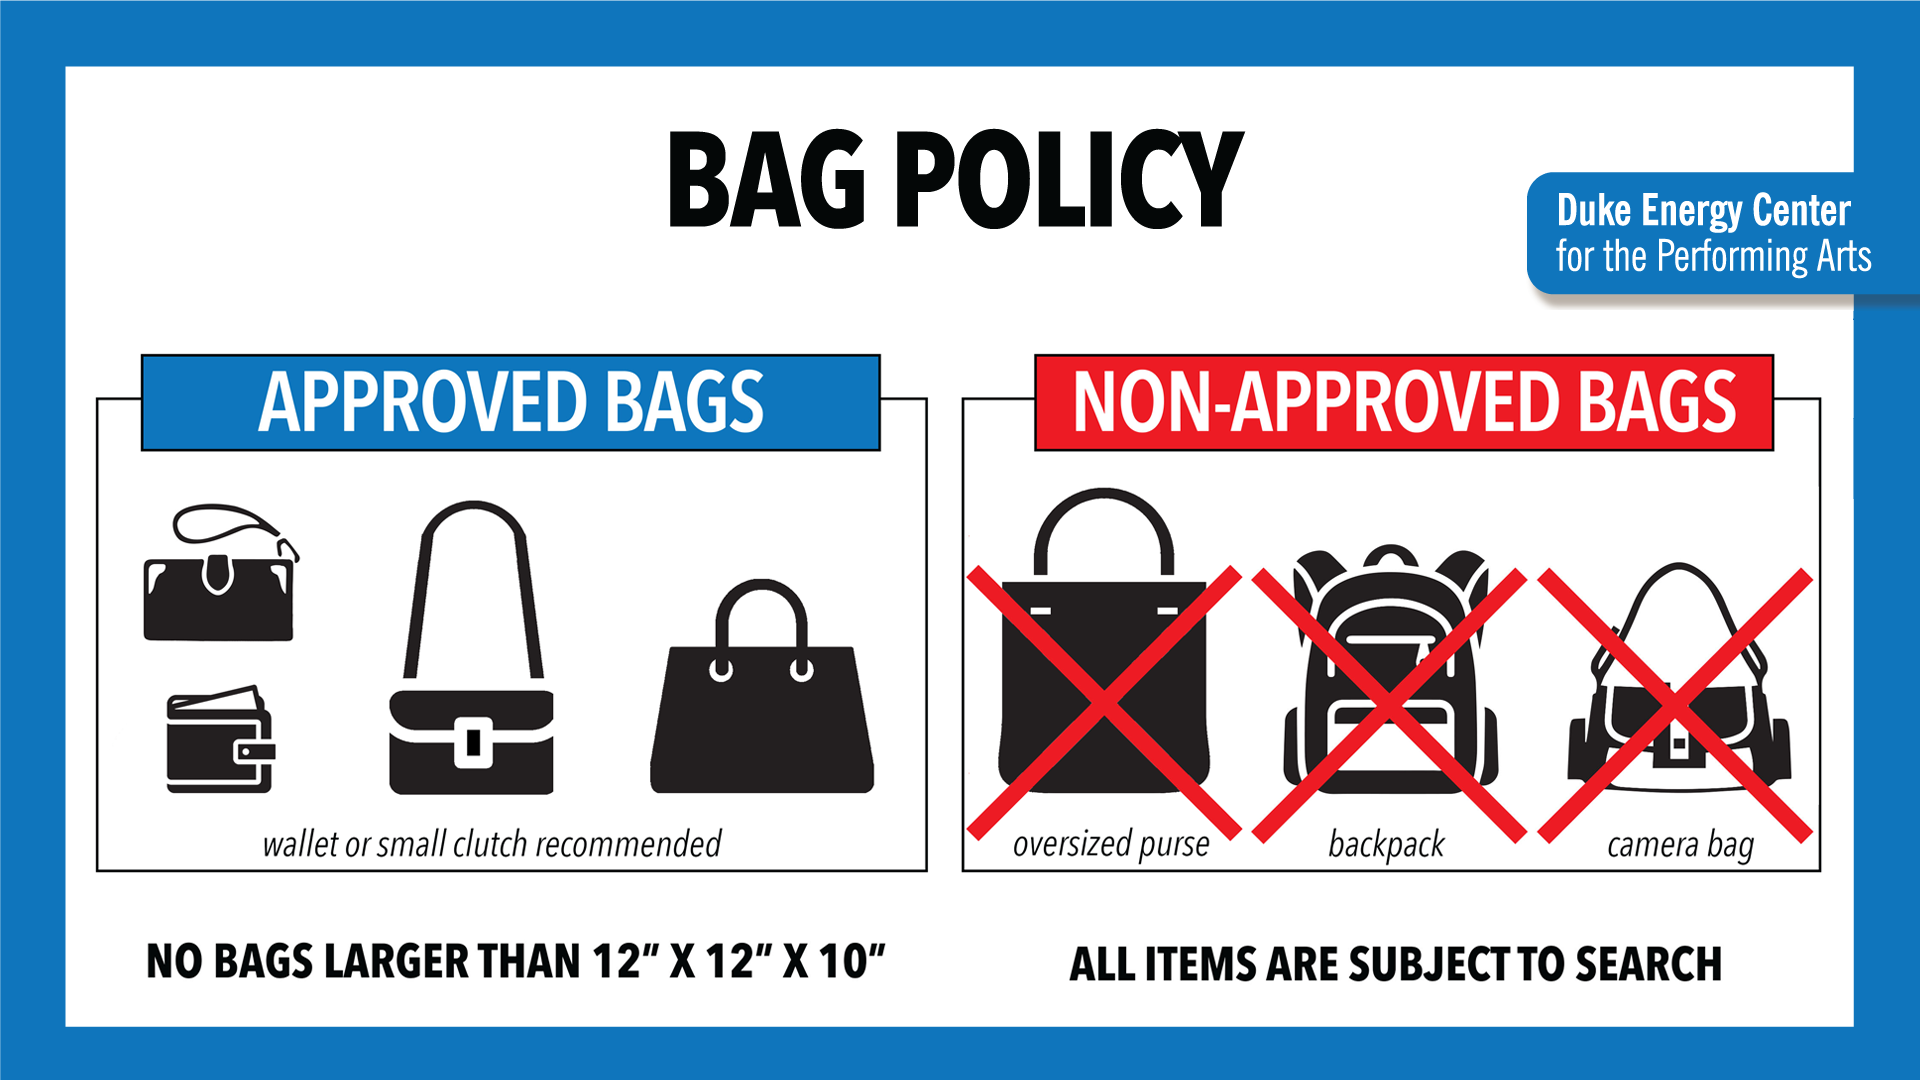 an image showing the bag policy